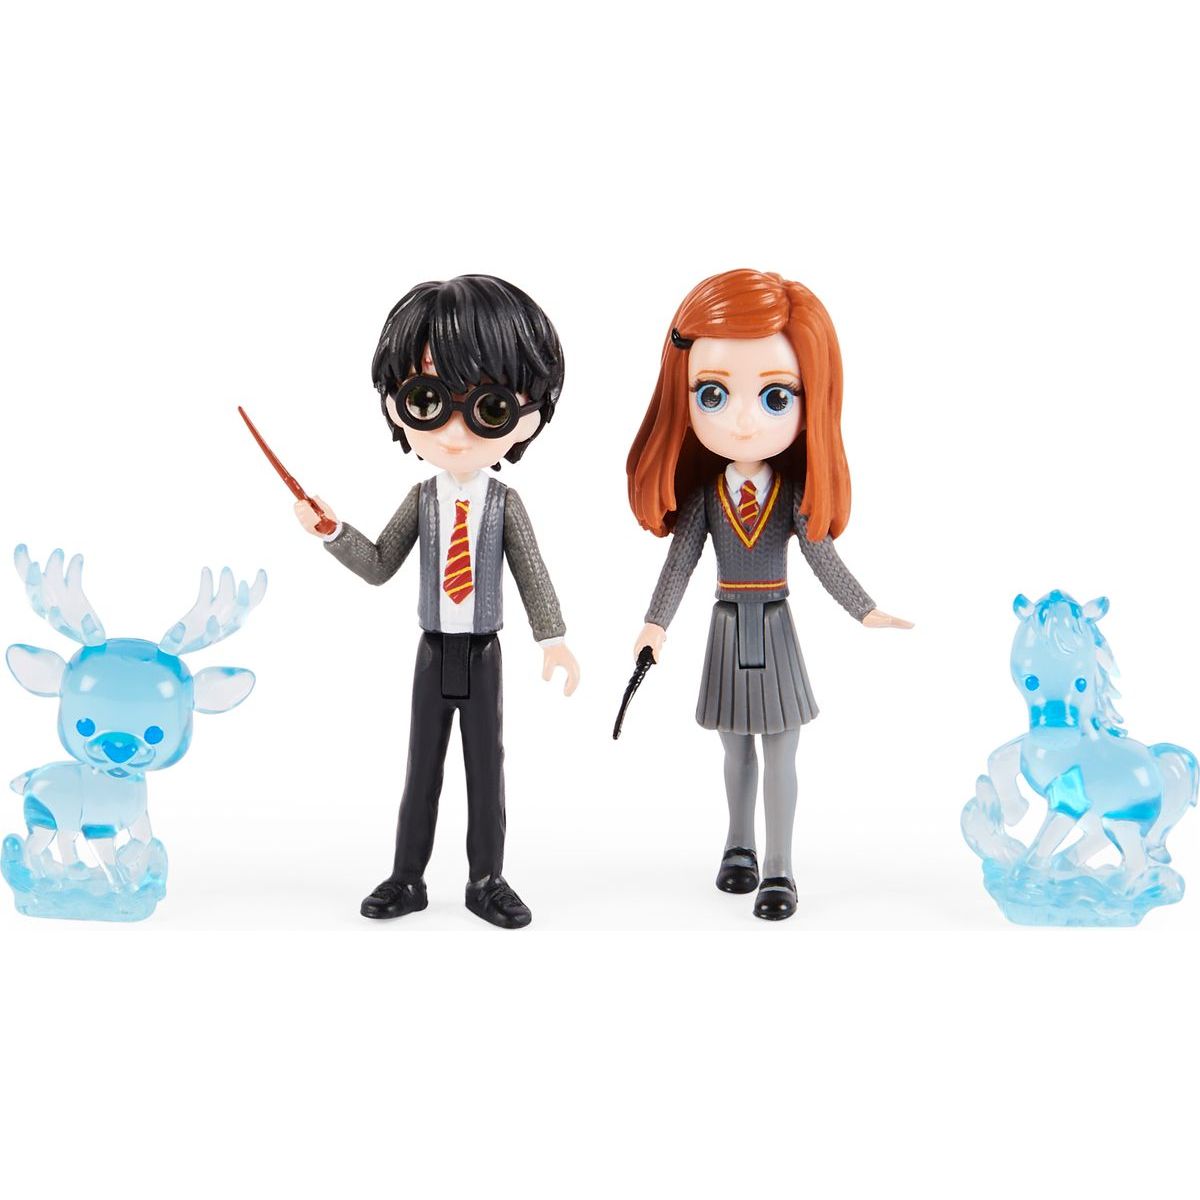 Wizarding World, Magical Minis Harry Potter and Ginny Weasley Patronus Friendship Set